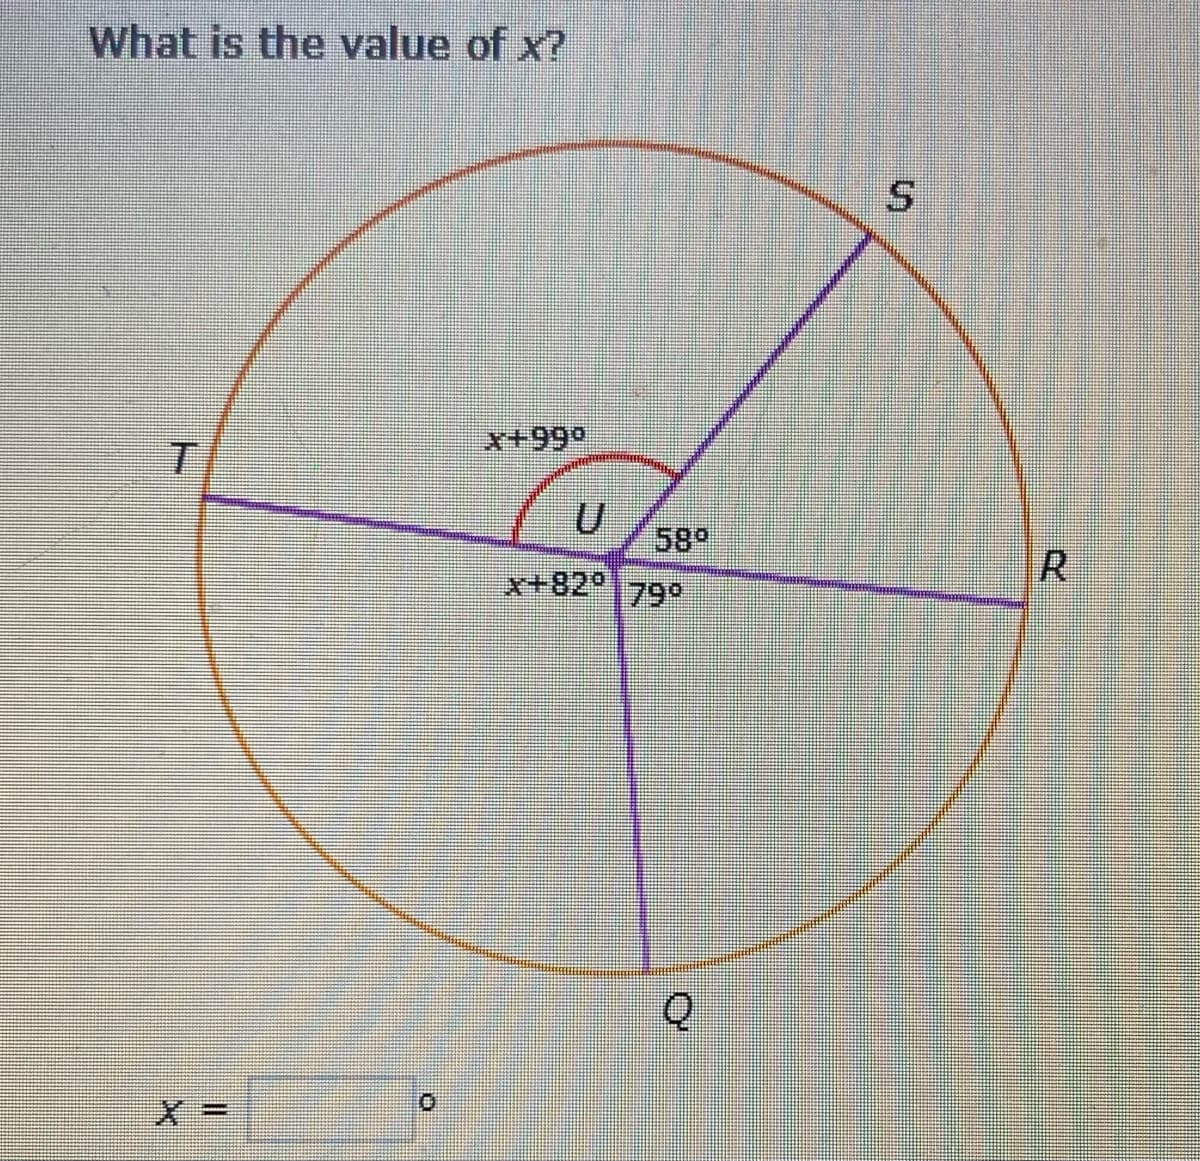 What is the value of x?
X+99⁰
0
58°
x+82° 79°
Q
S